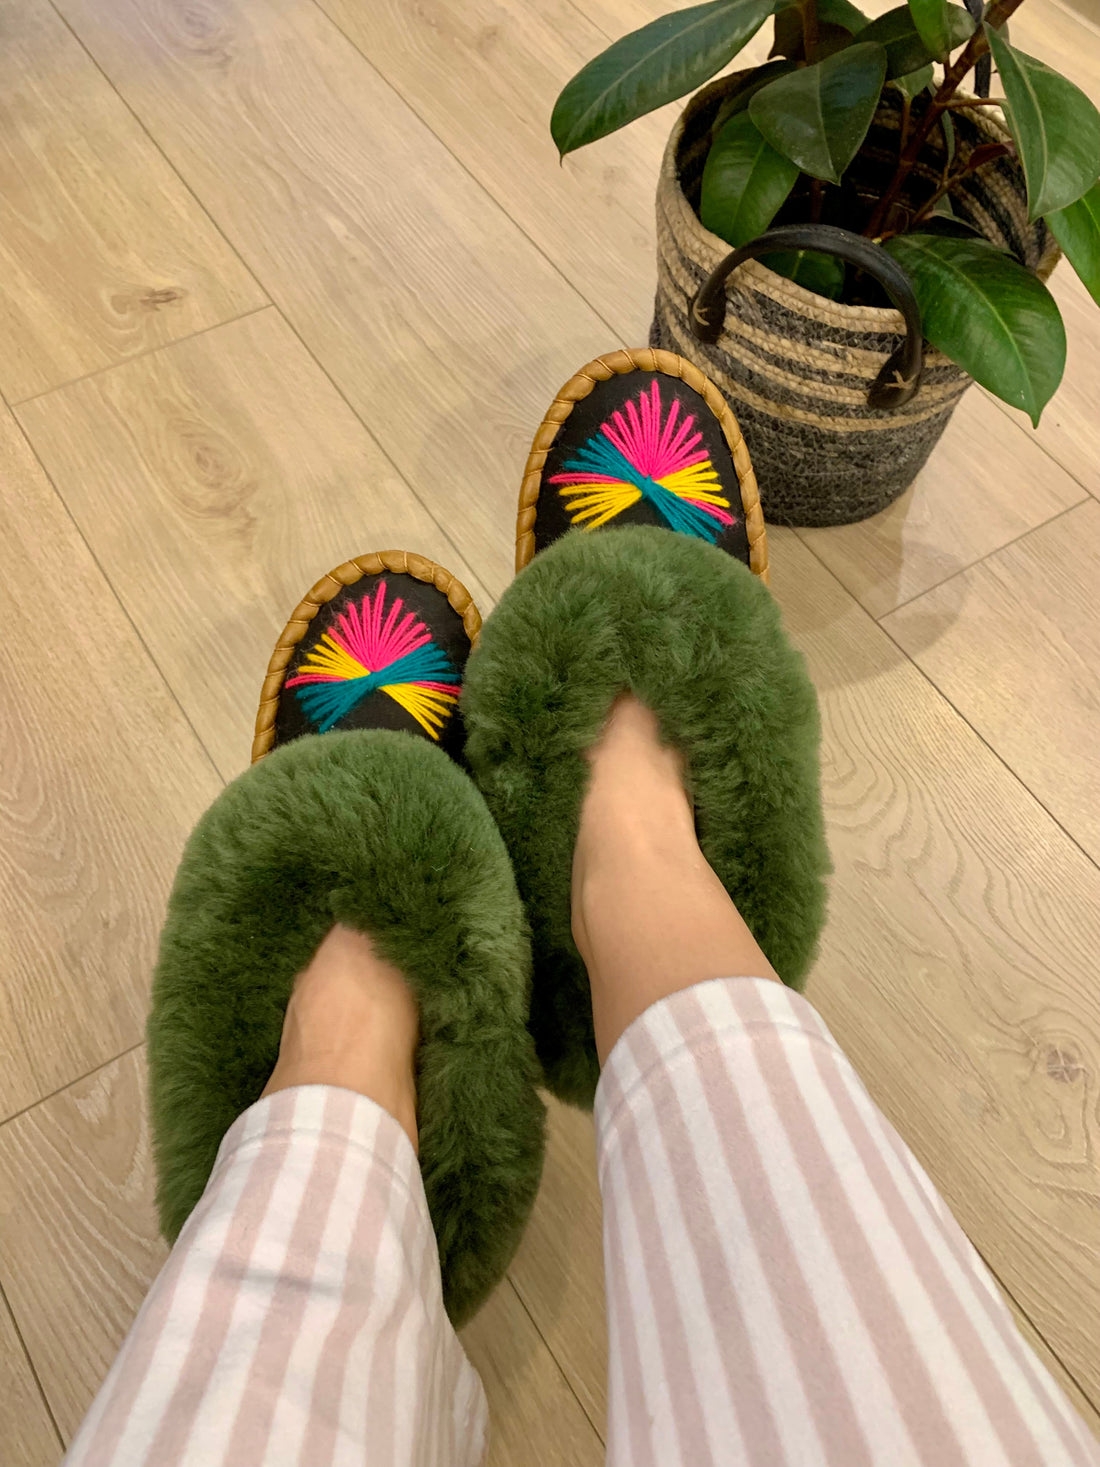 Sheep 🐑 Fur Slippers The One Of A Kind - Pinstripe